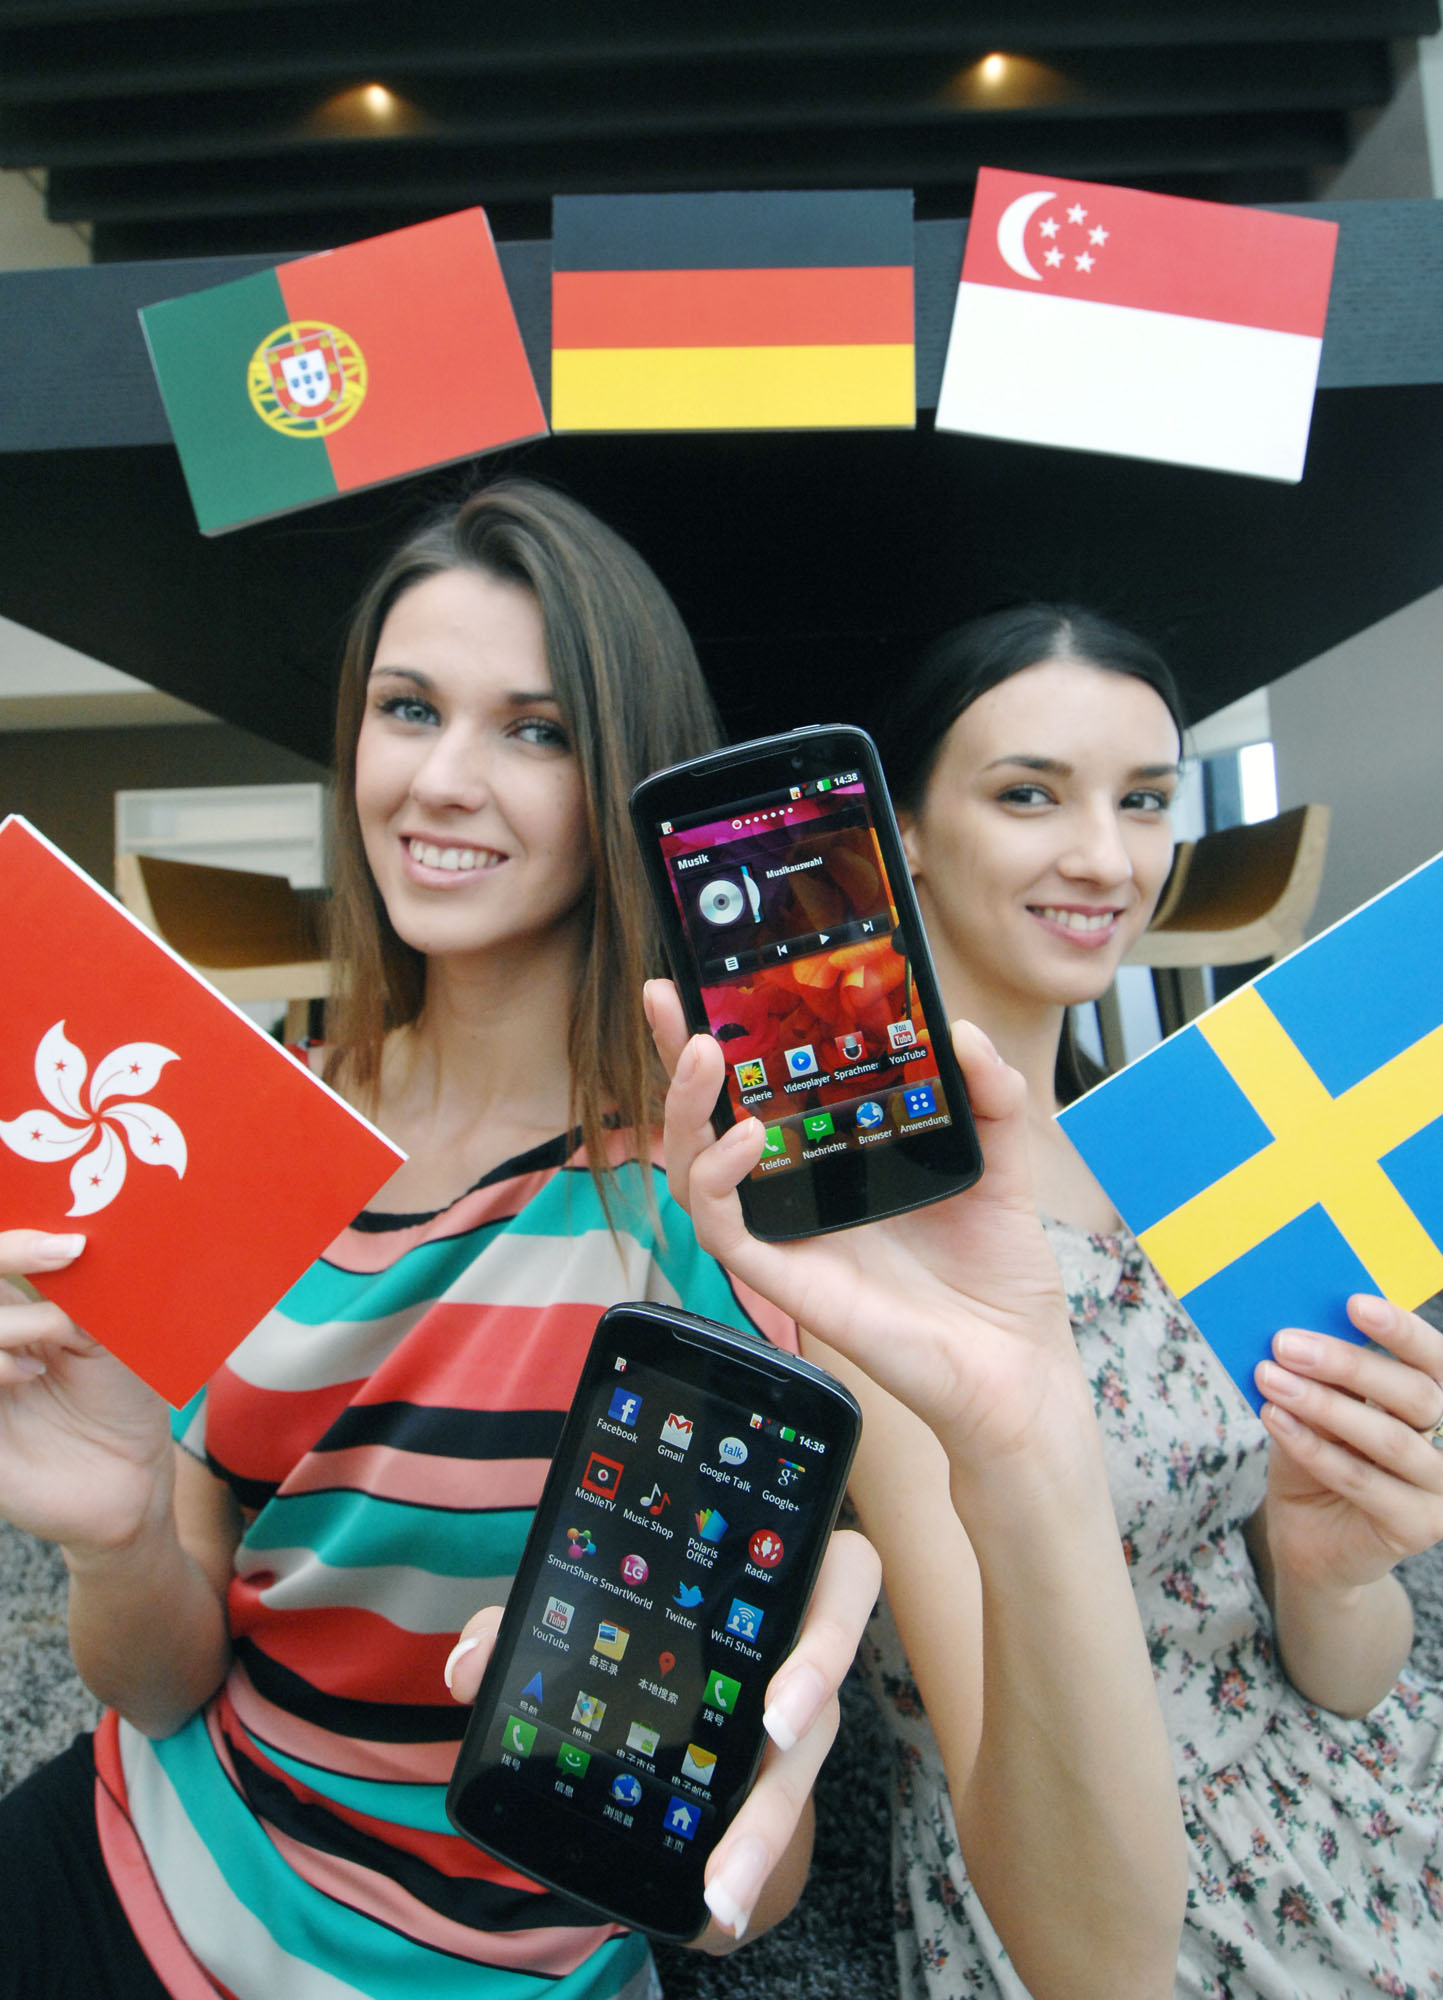 A third view of a model holding a Hong Kong flag and the LG Optimus HD LTE while another holds up the flag of Sweden and another LG Optimus HD LTE, all while in front of the Germany, Portugal and Singapore flags